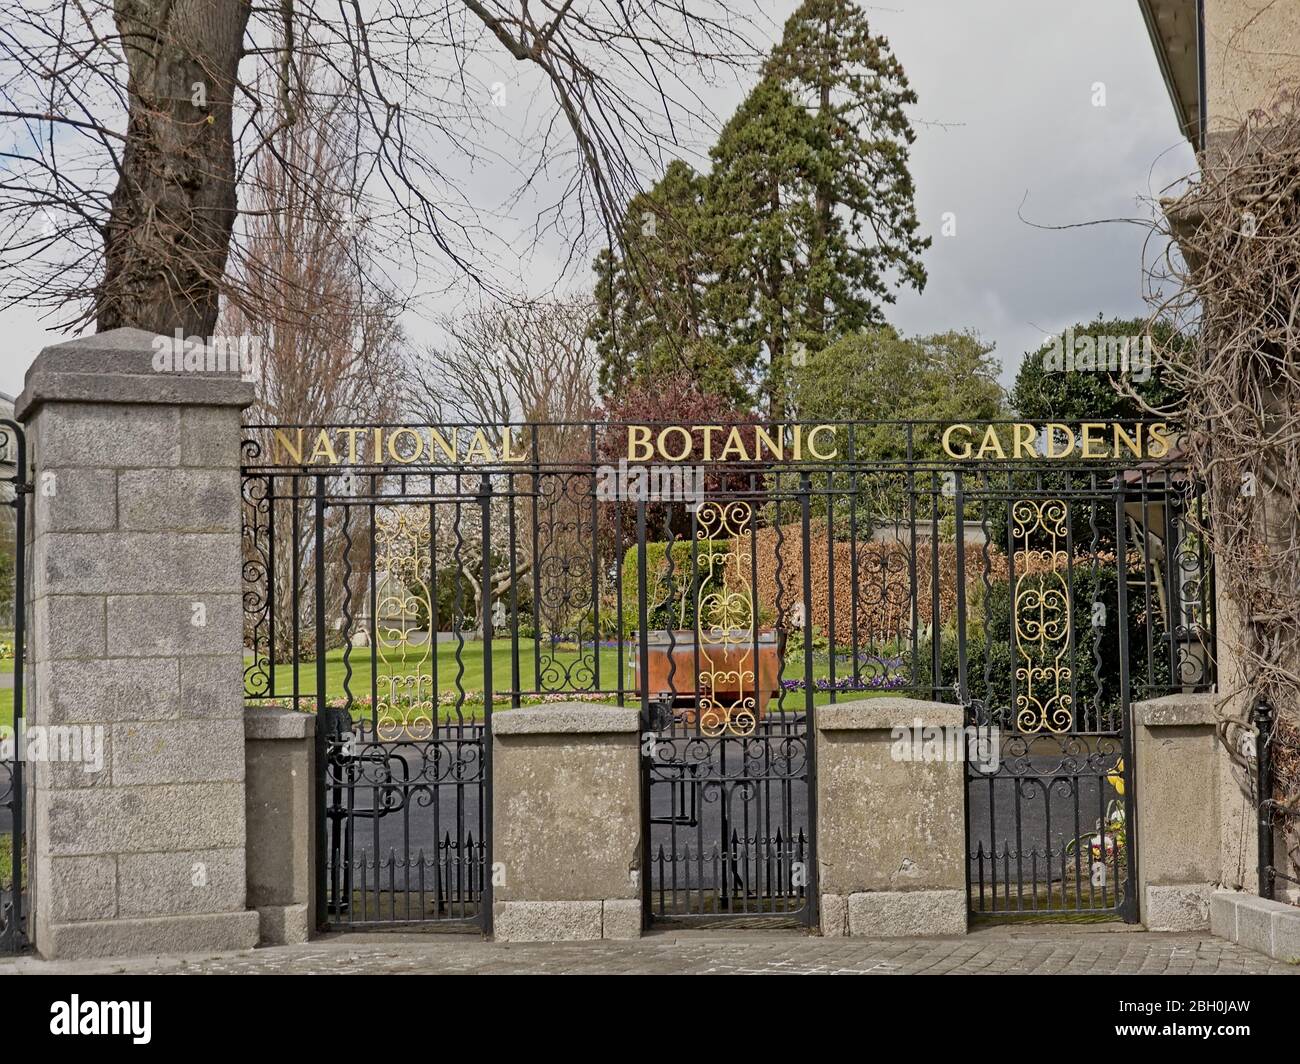 Entrance gate to Dublin botanic gardens in black and gold painted decorative ironwork, with park with trees behind Stock Photo